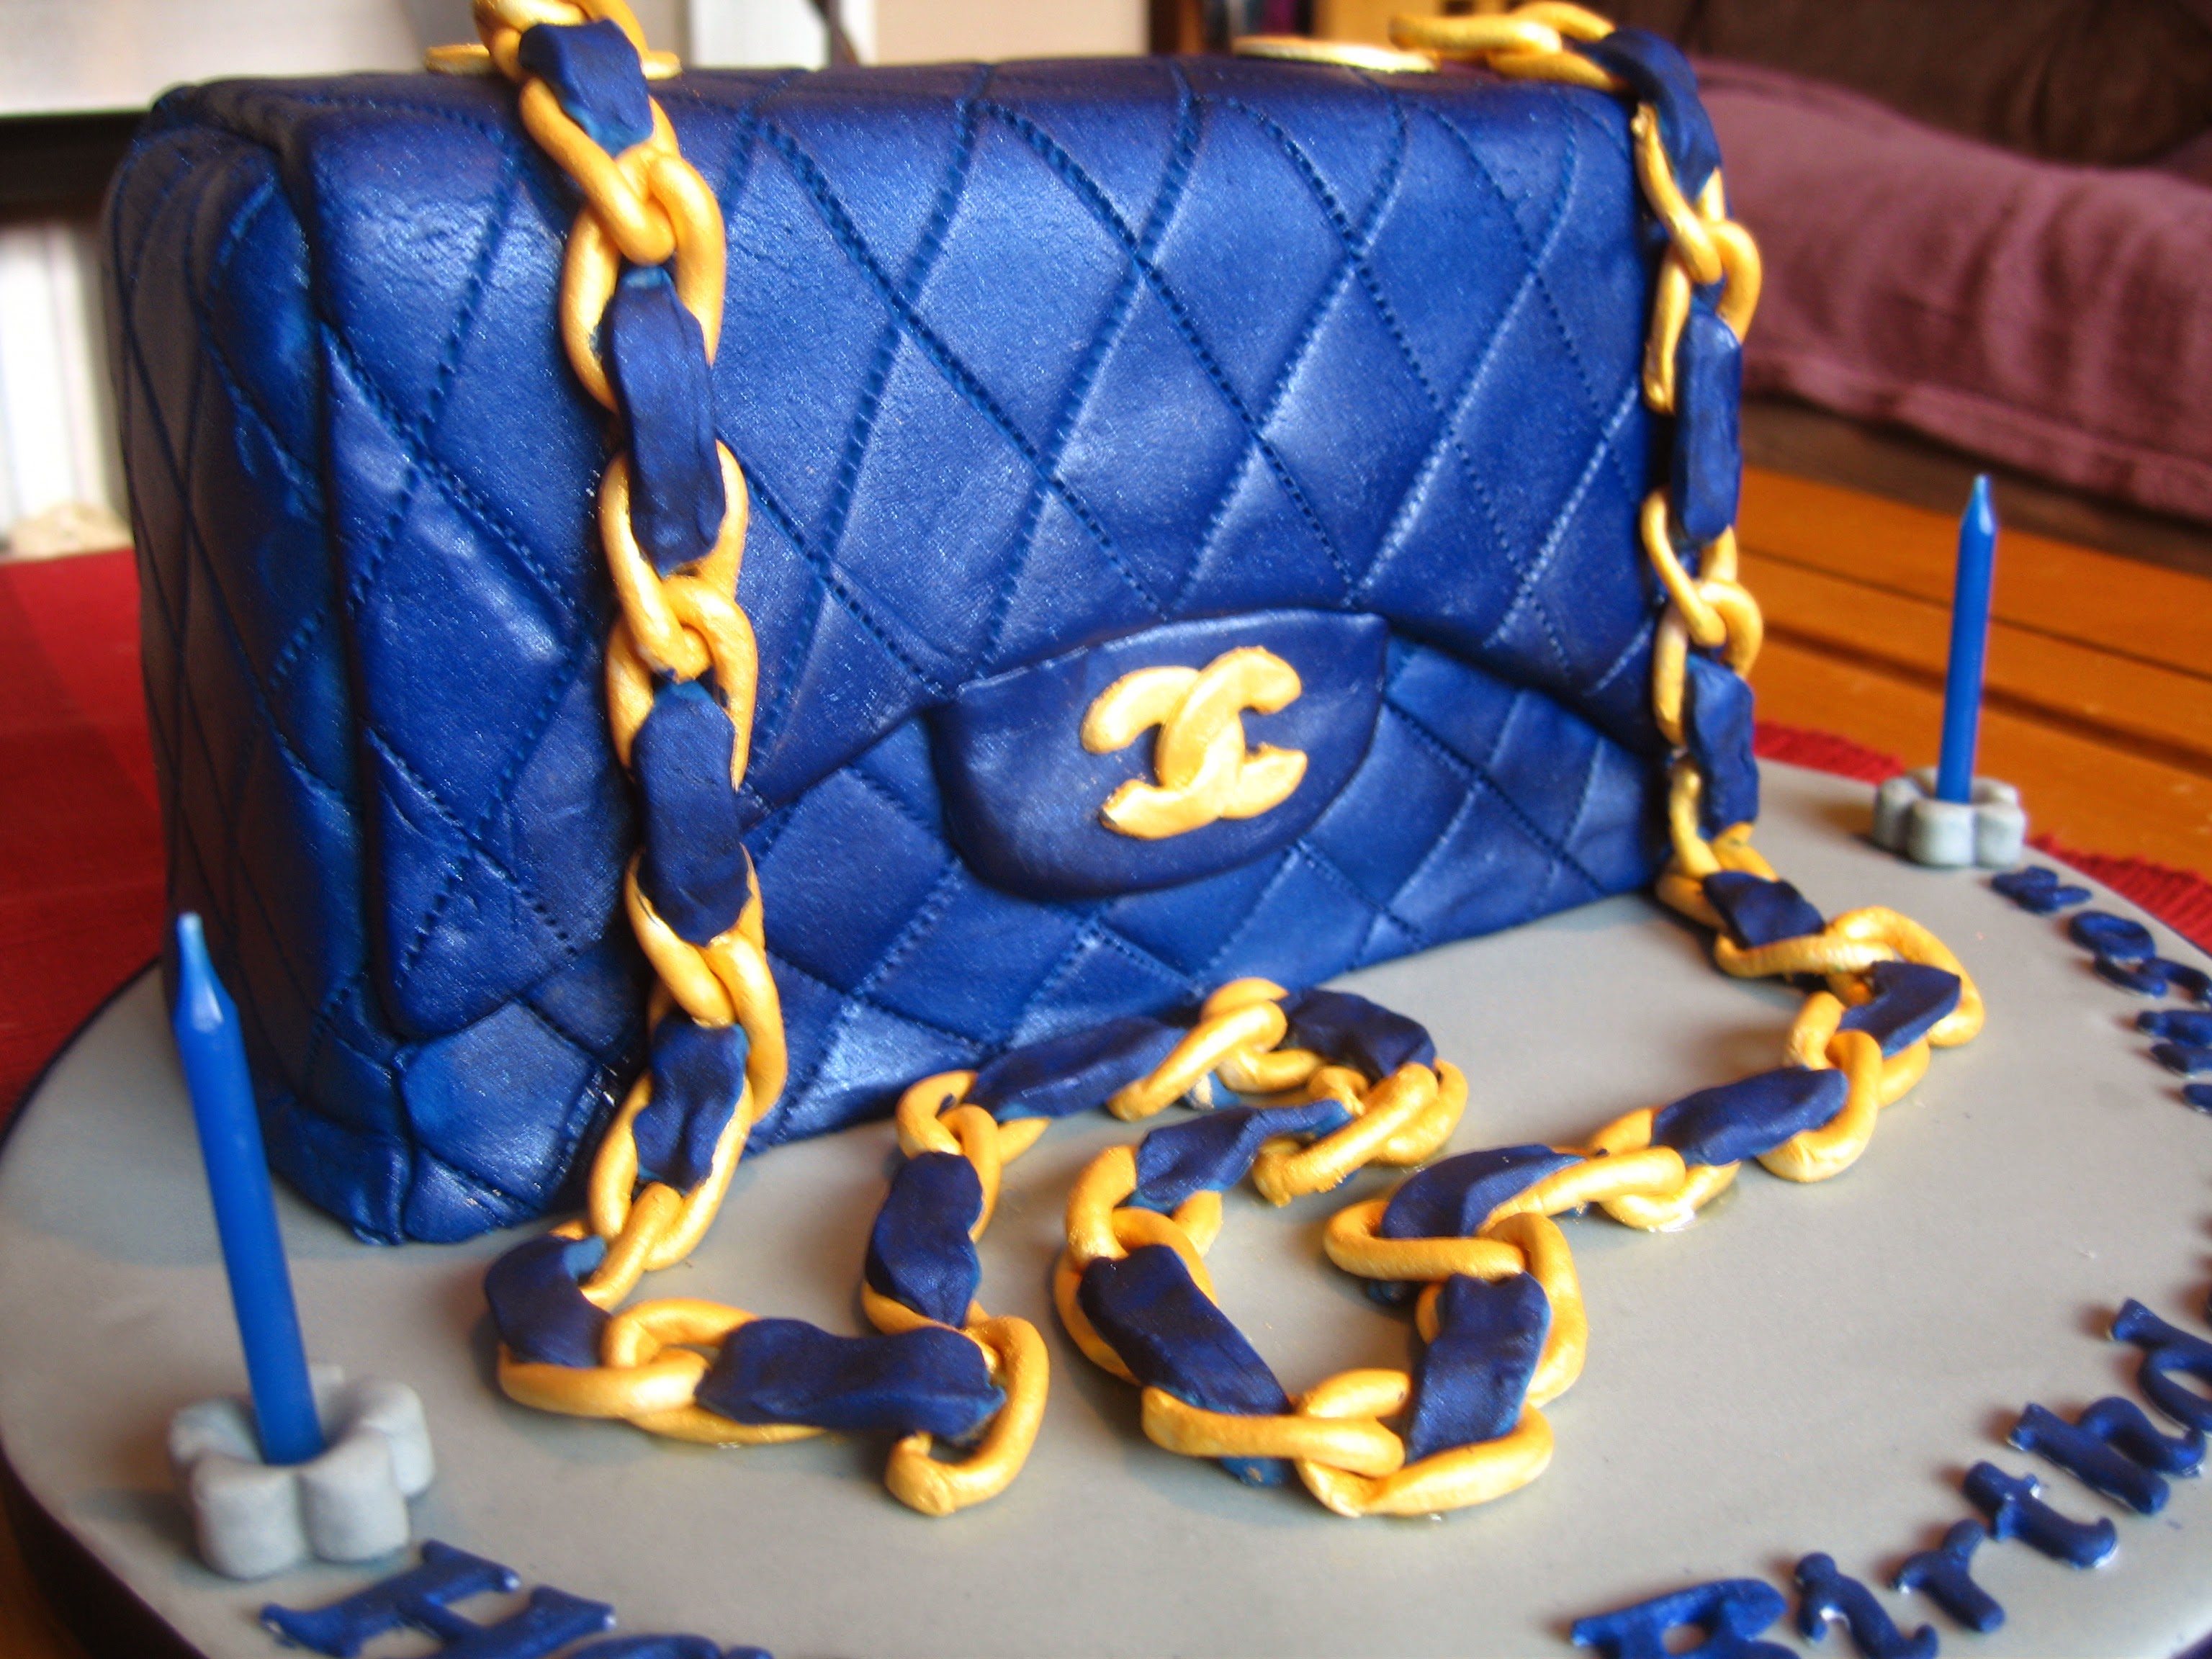 Chanel Bag Cake  How To Decorate A Handbag Cake  Baking on Cut Out  Keep